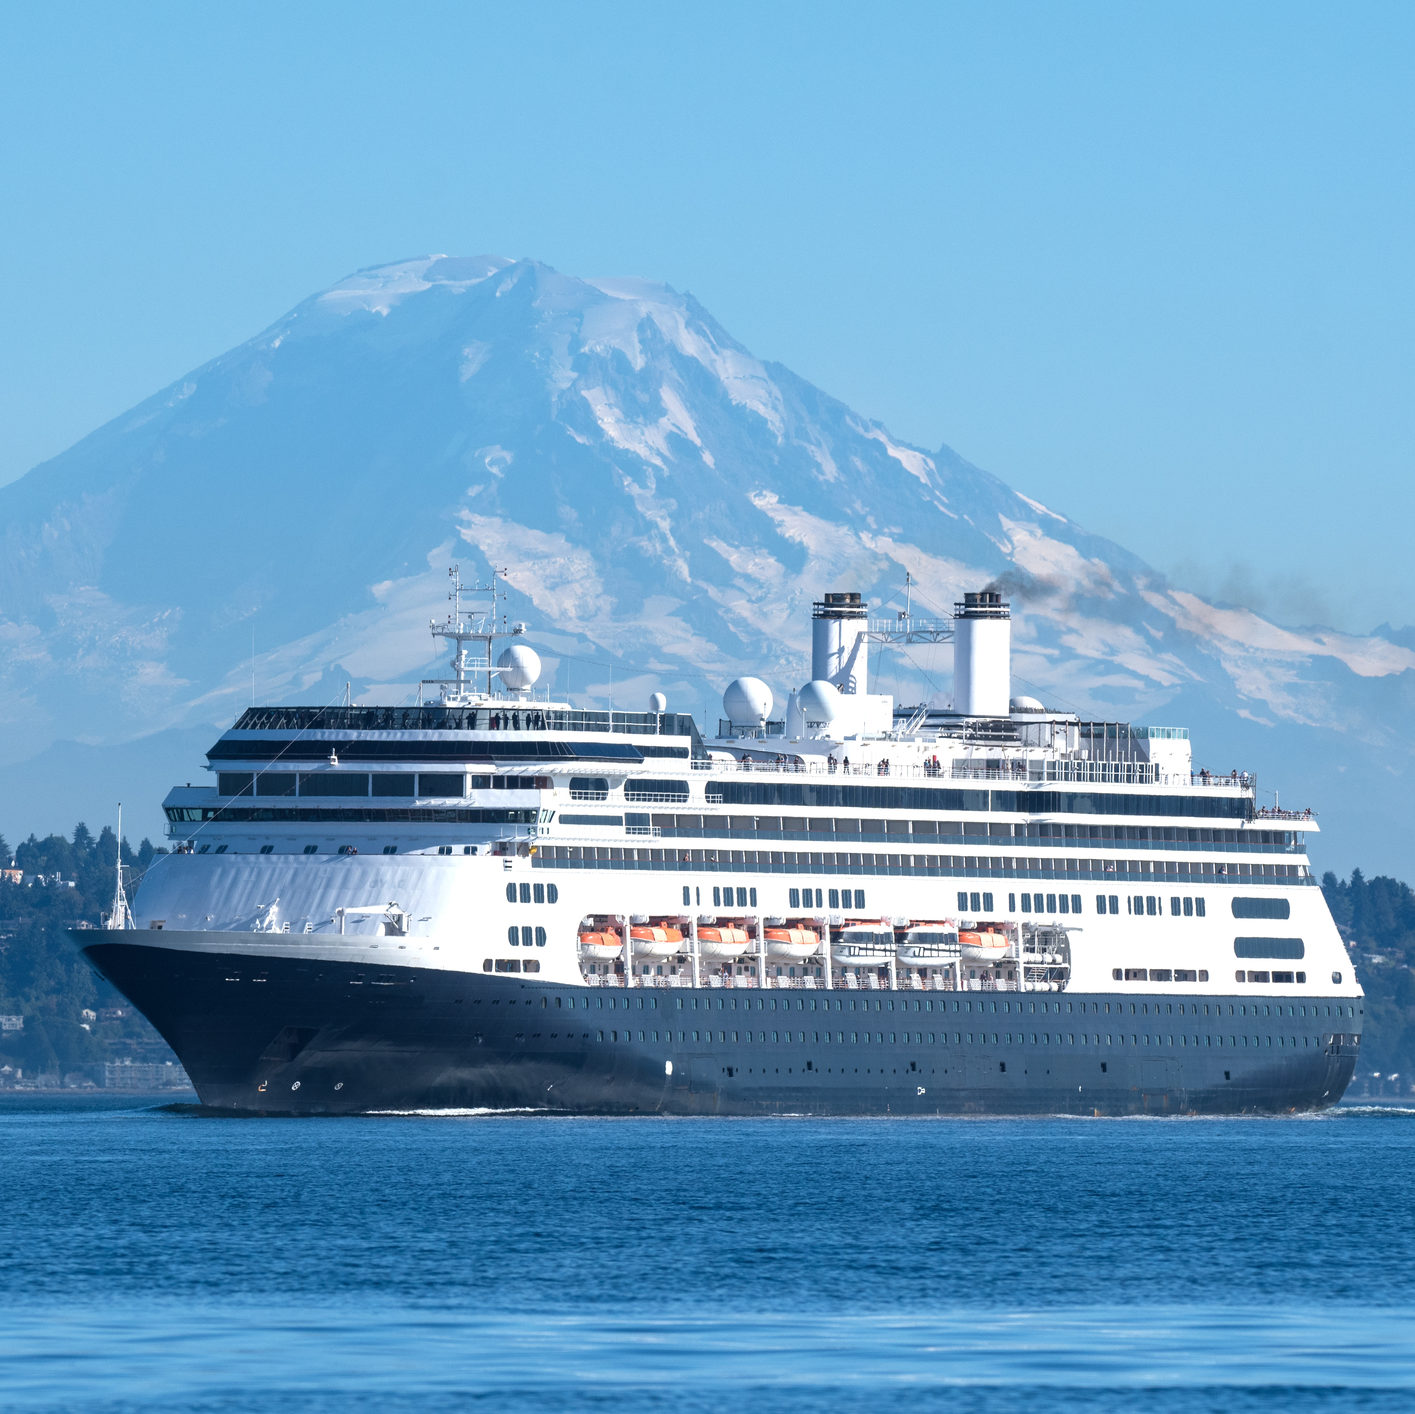 7-day Alaska cruise on Holland America from $599